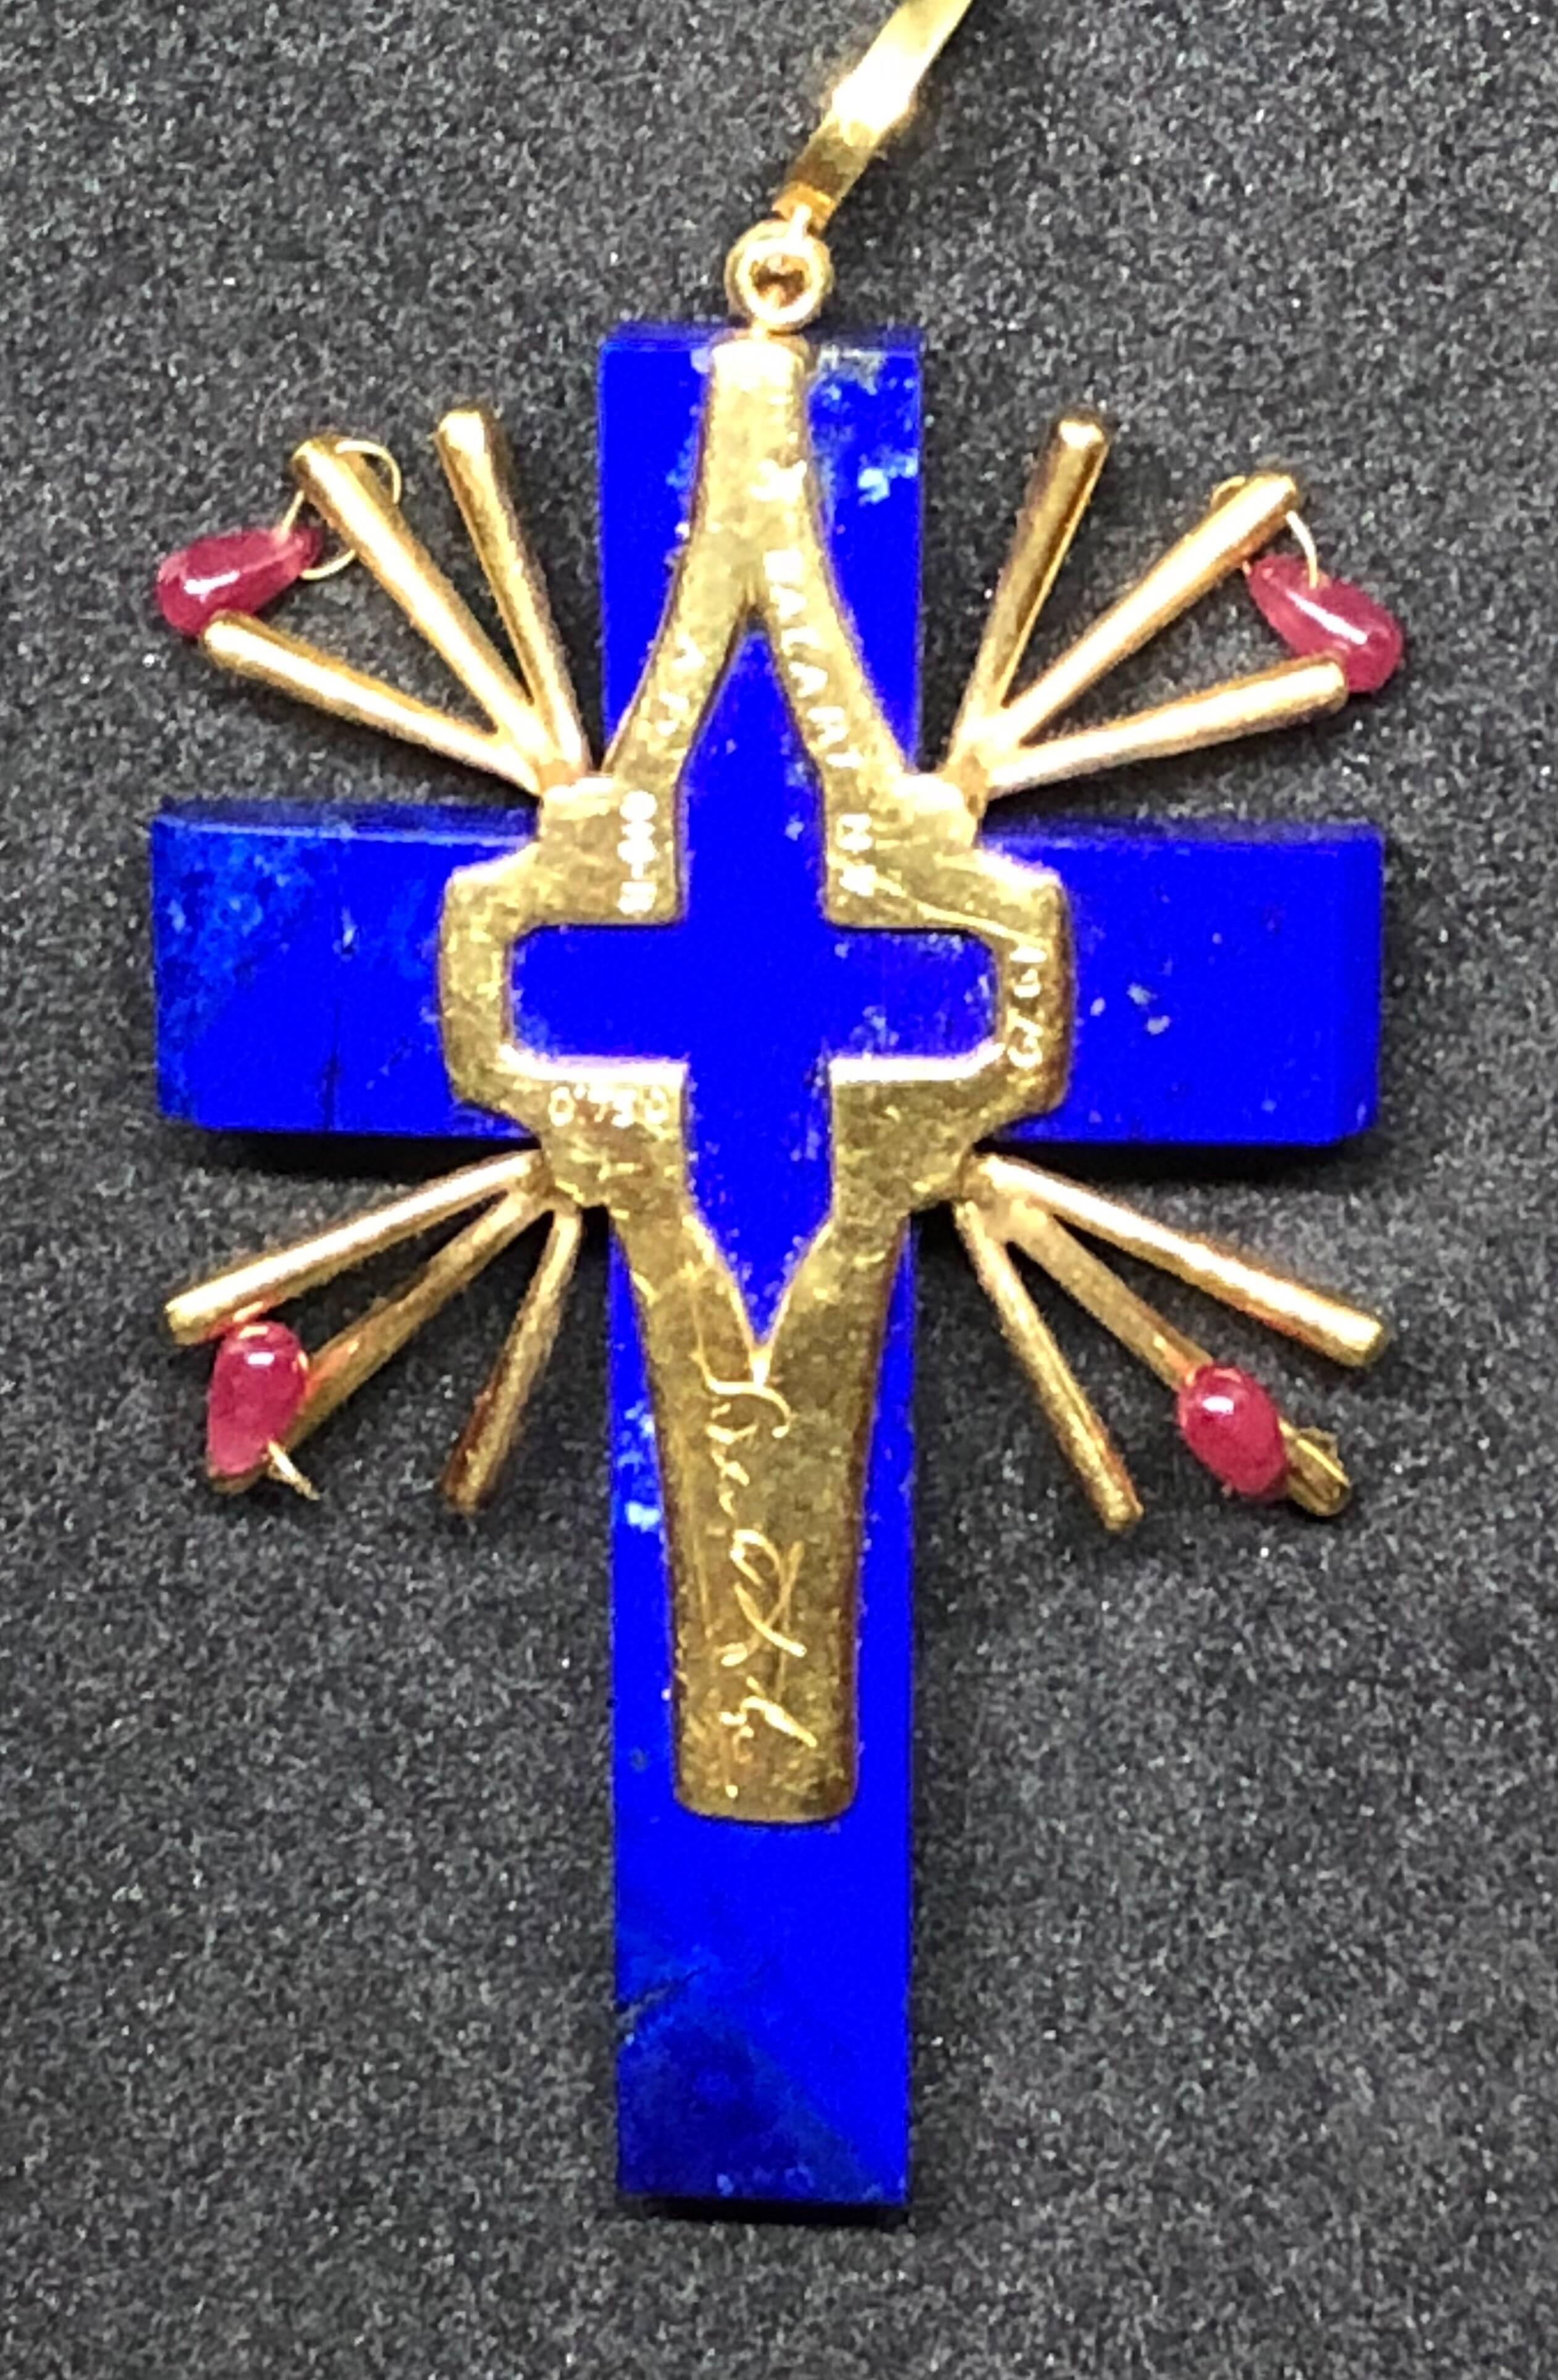 Salvador Dali (1904-1989) crucifixion- necklace Limited edition lapis lazuli sculpture, gold with small diamonds with approx. 0.29-carat and pear cut rubies pendant. 16 gold and diamonds aplpliqués.
Original 18-carat gold necklace
This is the